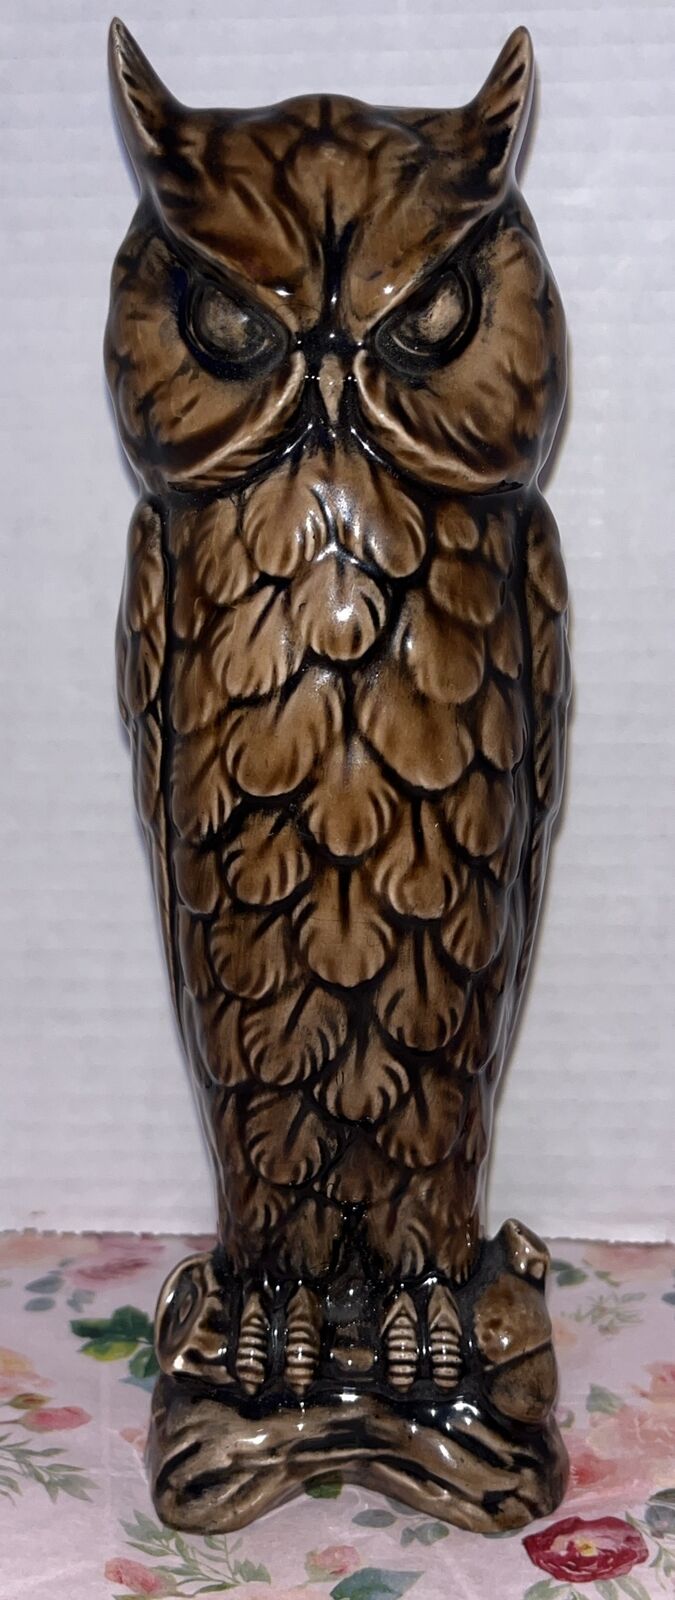 Owl figurine hobbyist made 9” tall excellent condition 